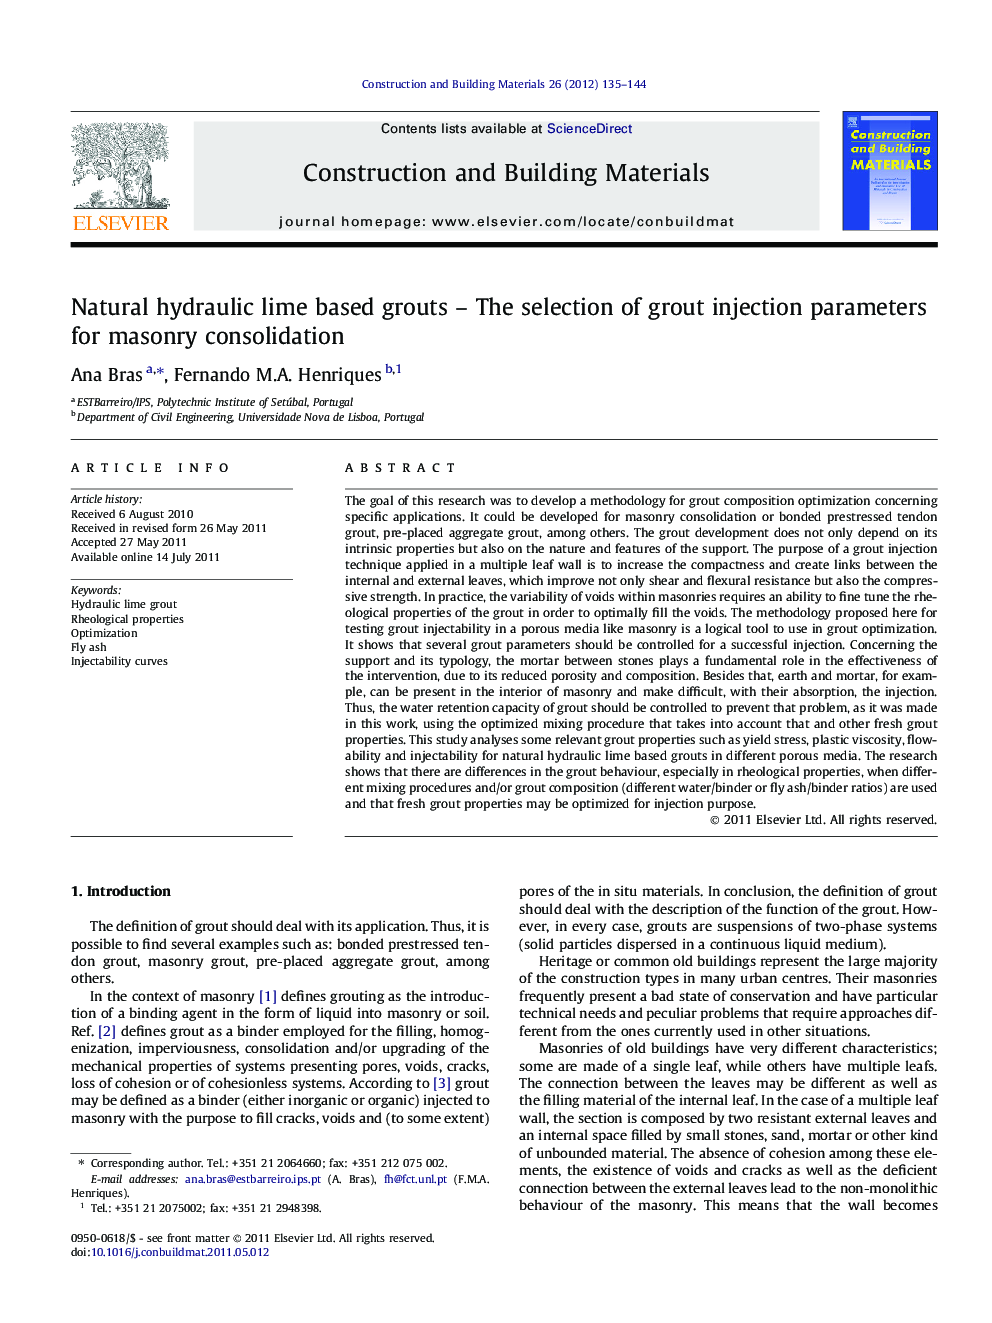 Natural hydraulic lime based grouts – The selection of grout injection parameters for masonry consolidation